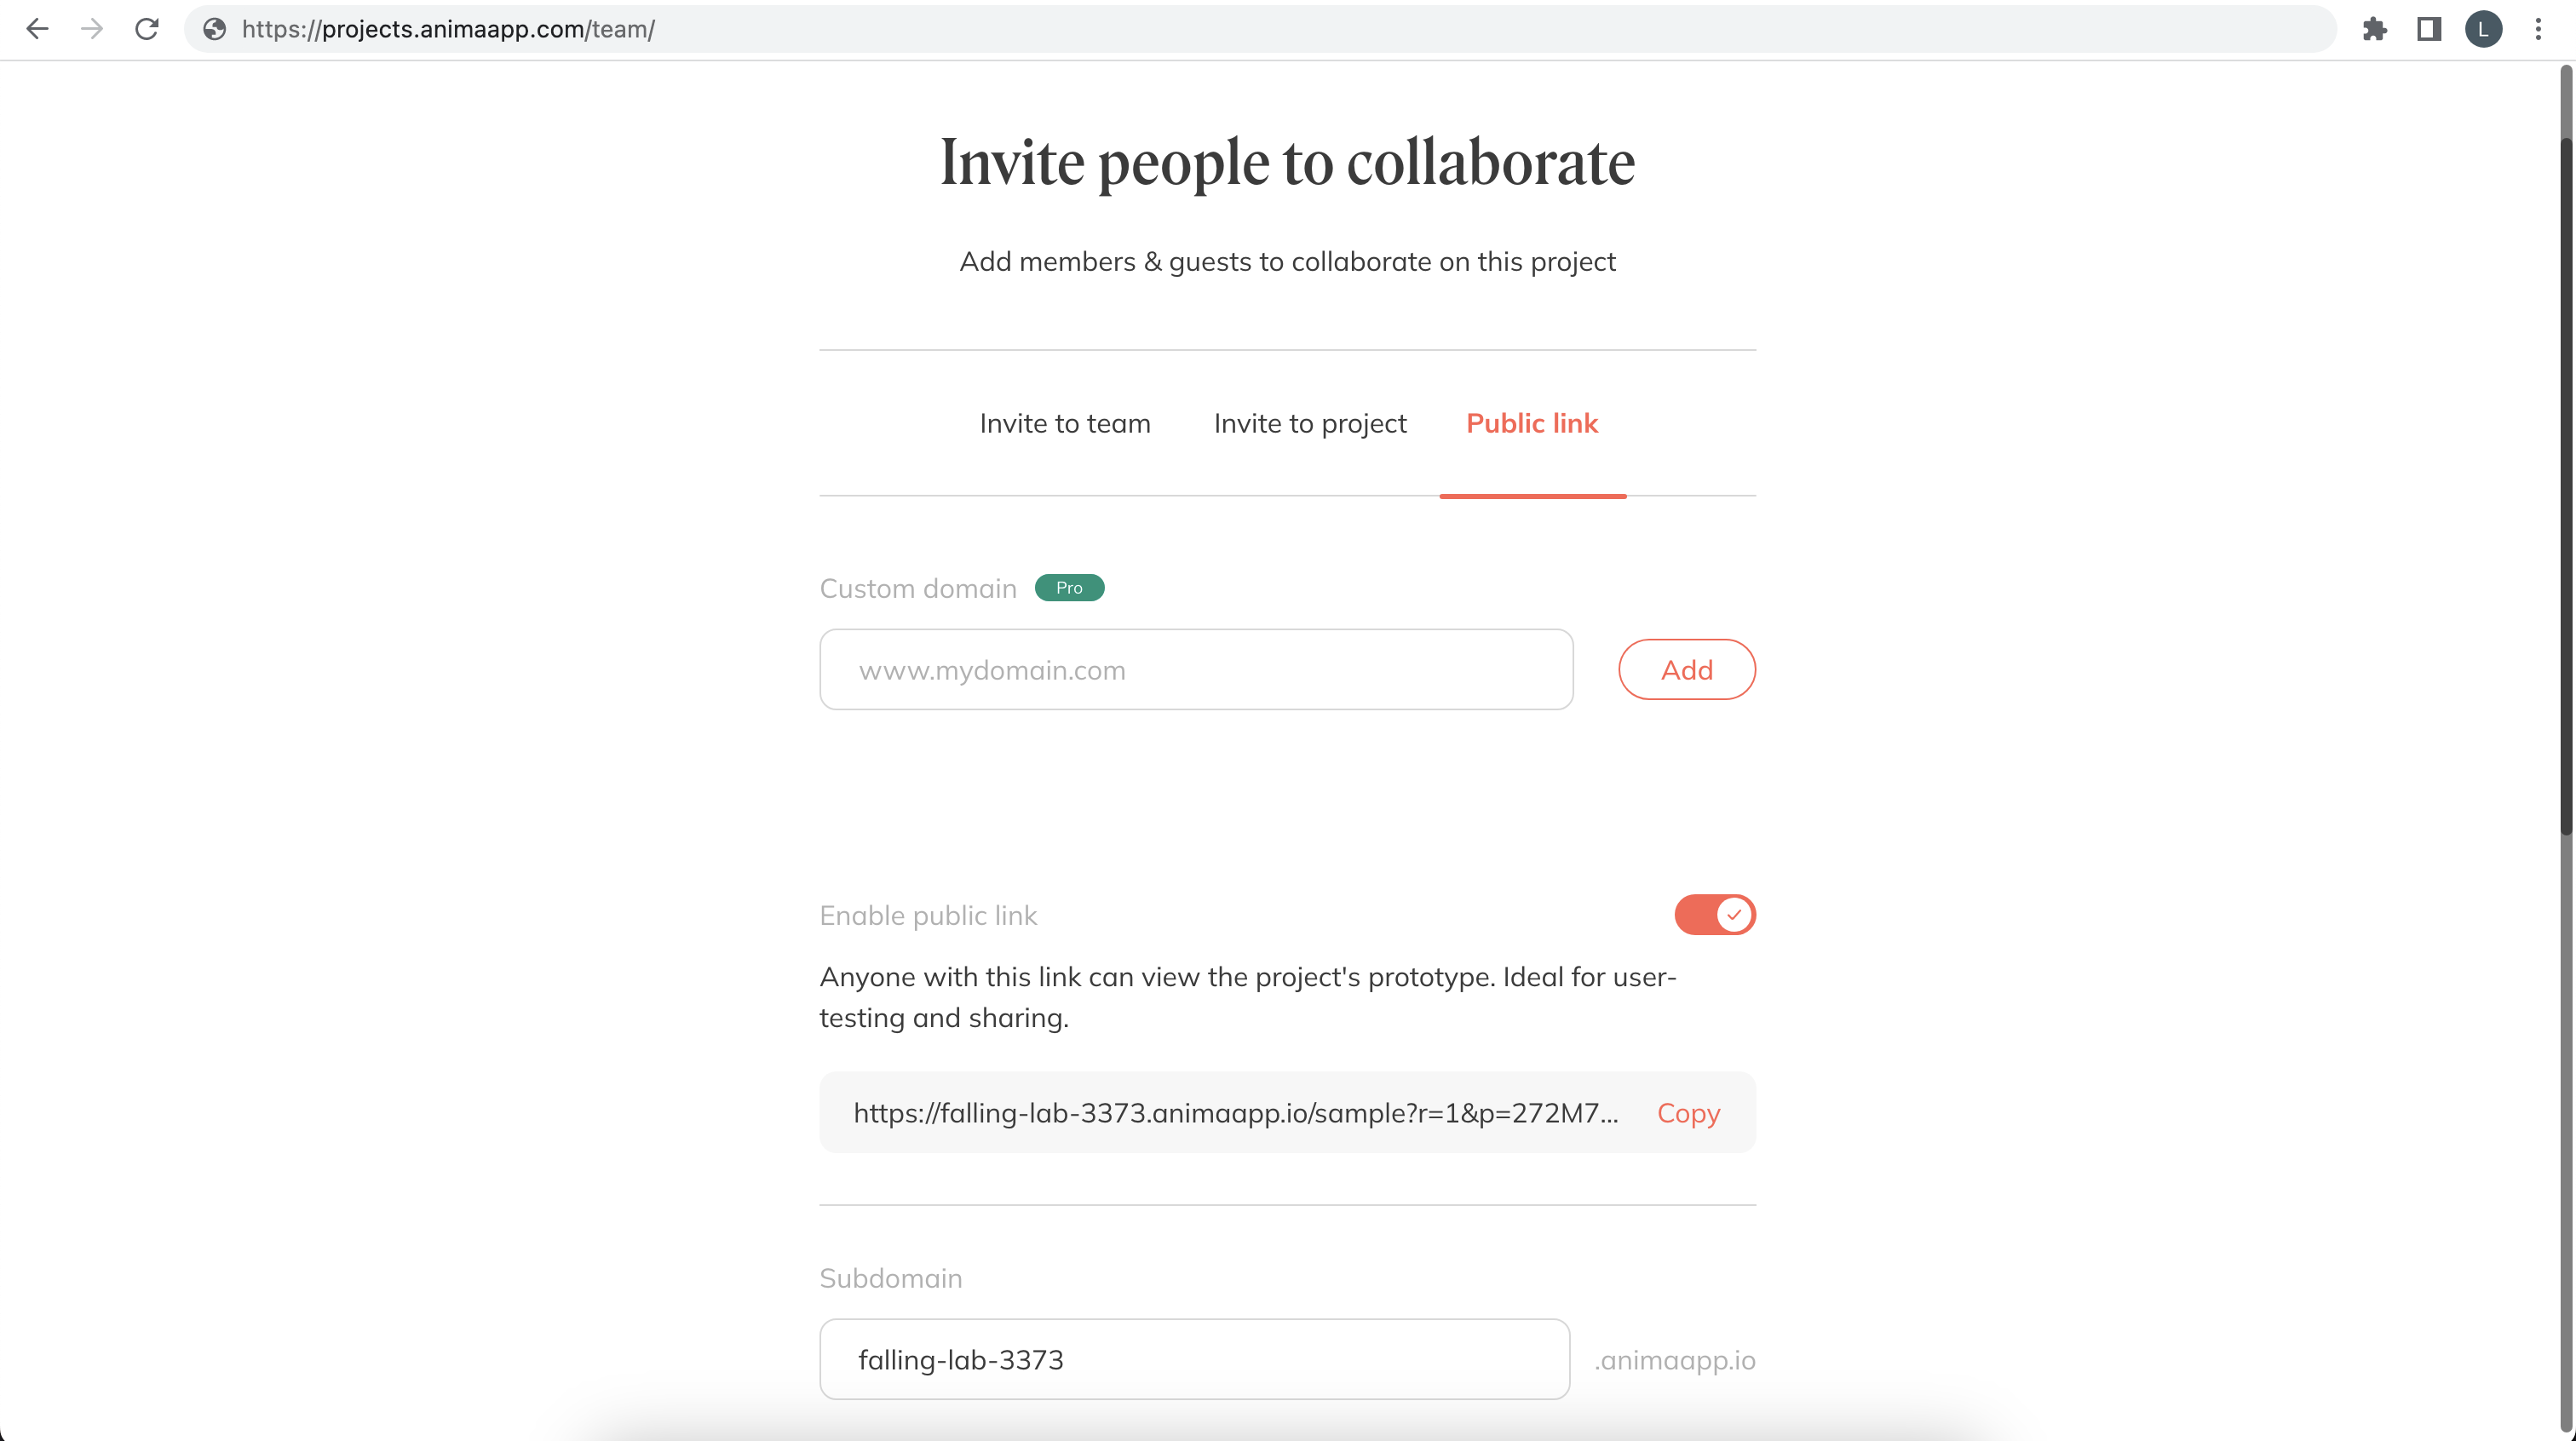 Sharing a link to an interactive prototype built in Figma.